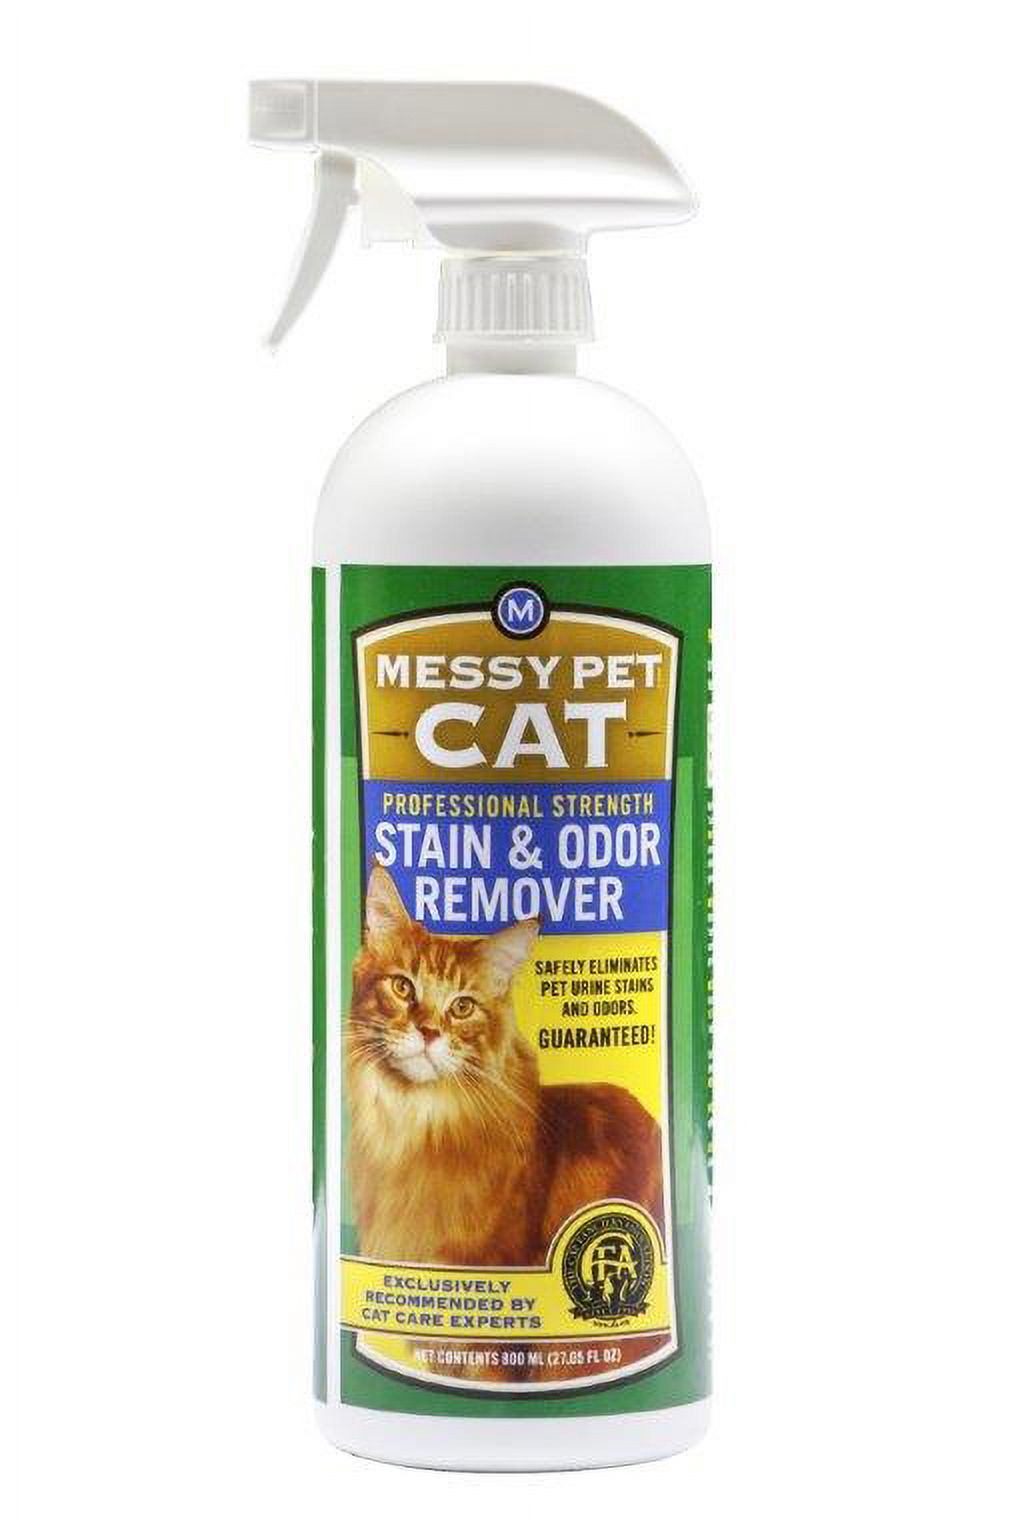 MESSY PET CAT Stain & Odor Remover - image 2 of 2